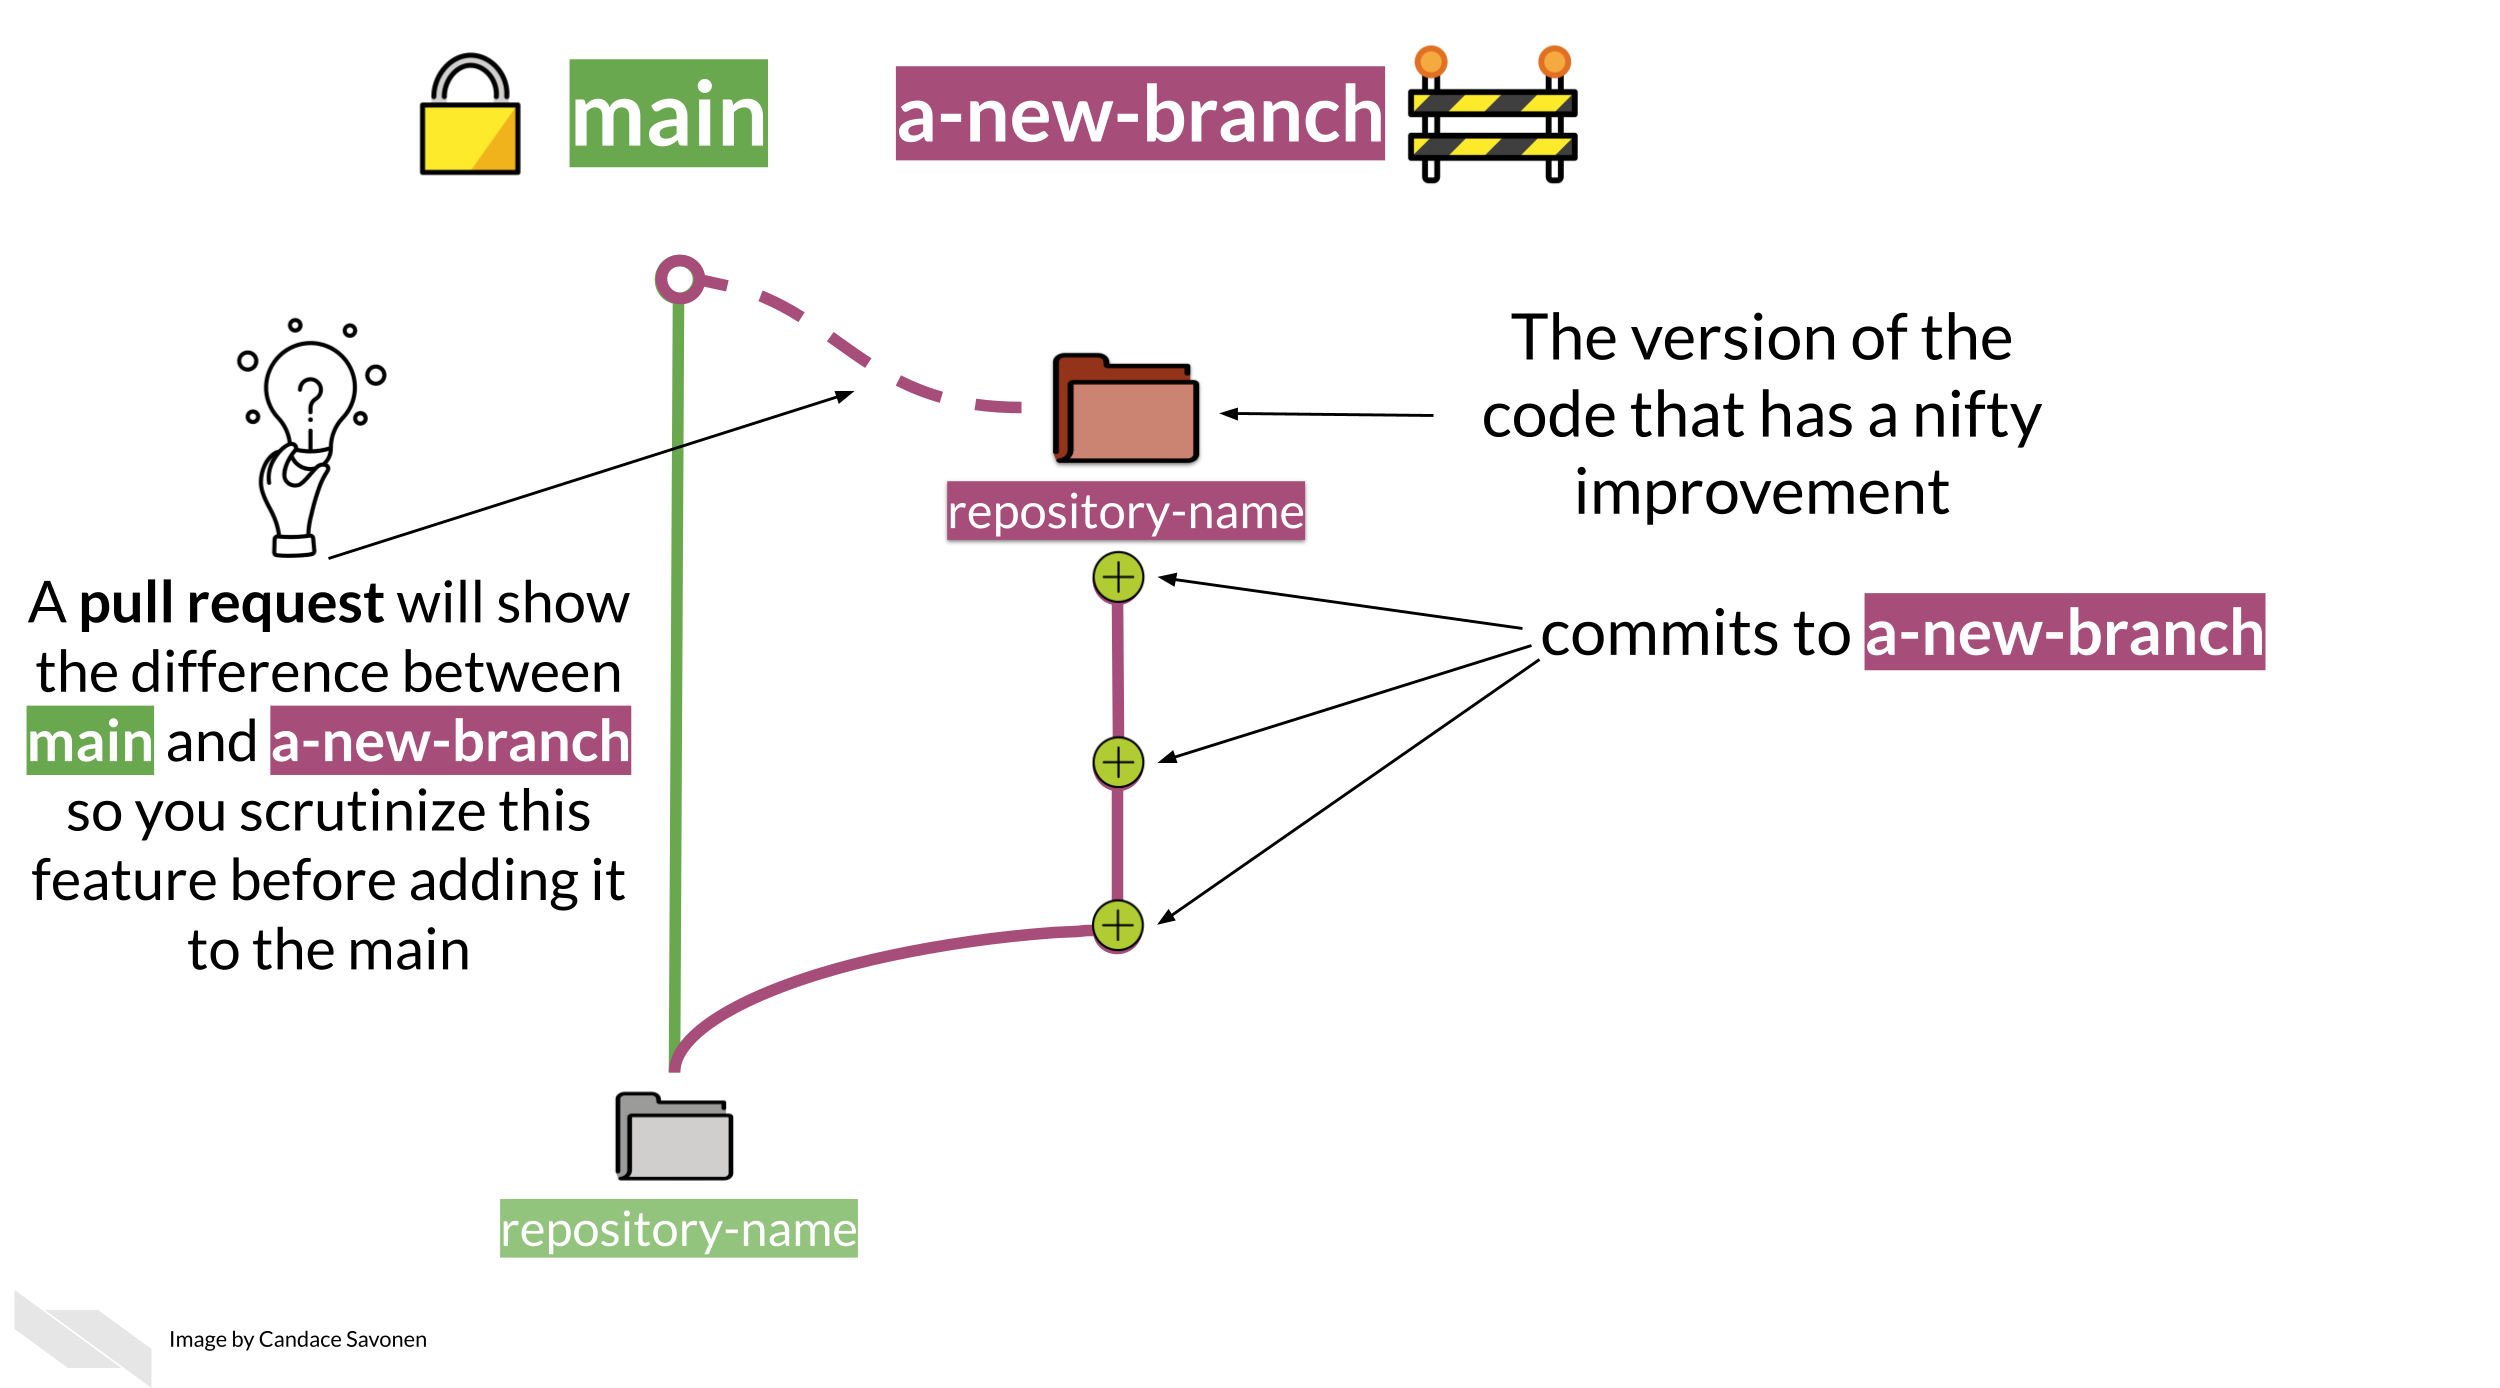 After a variable number of commits, your branch, called a-new-branch is a different version of the original code base that may have a nifty improvement to it. But our main goal is to add that nifty improvement to the main branch. To start this process of bringing in new changes to the main curated repository, we will create a pull request. A pull request will show us the difference between main and a-new-branch so you scrutinize this feature before adding it to the main branch.